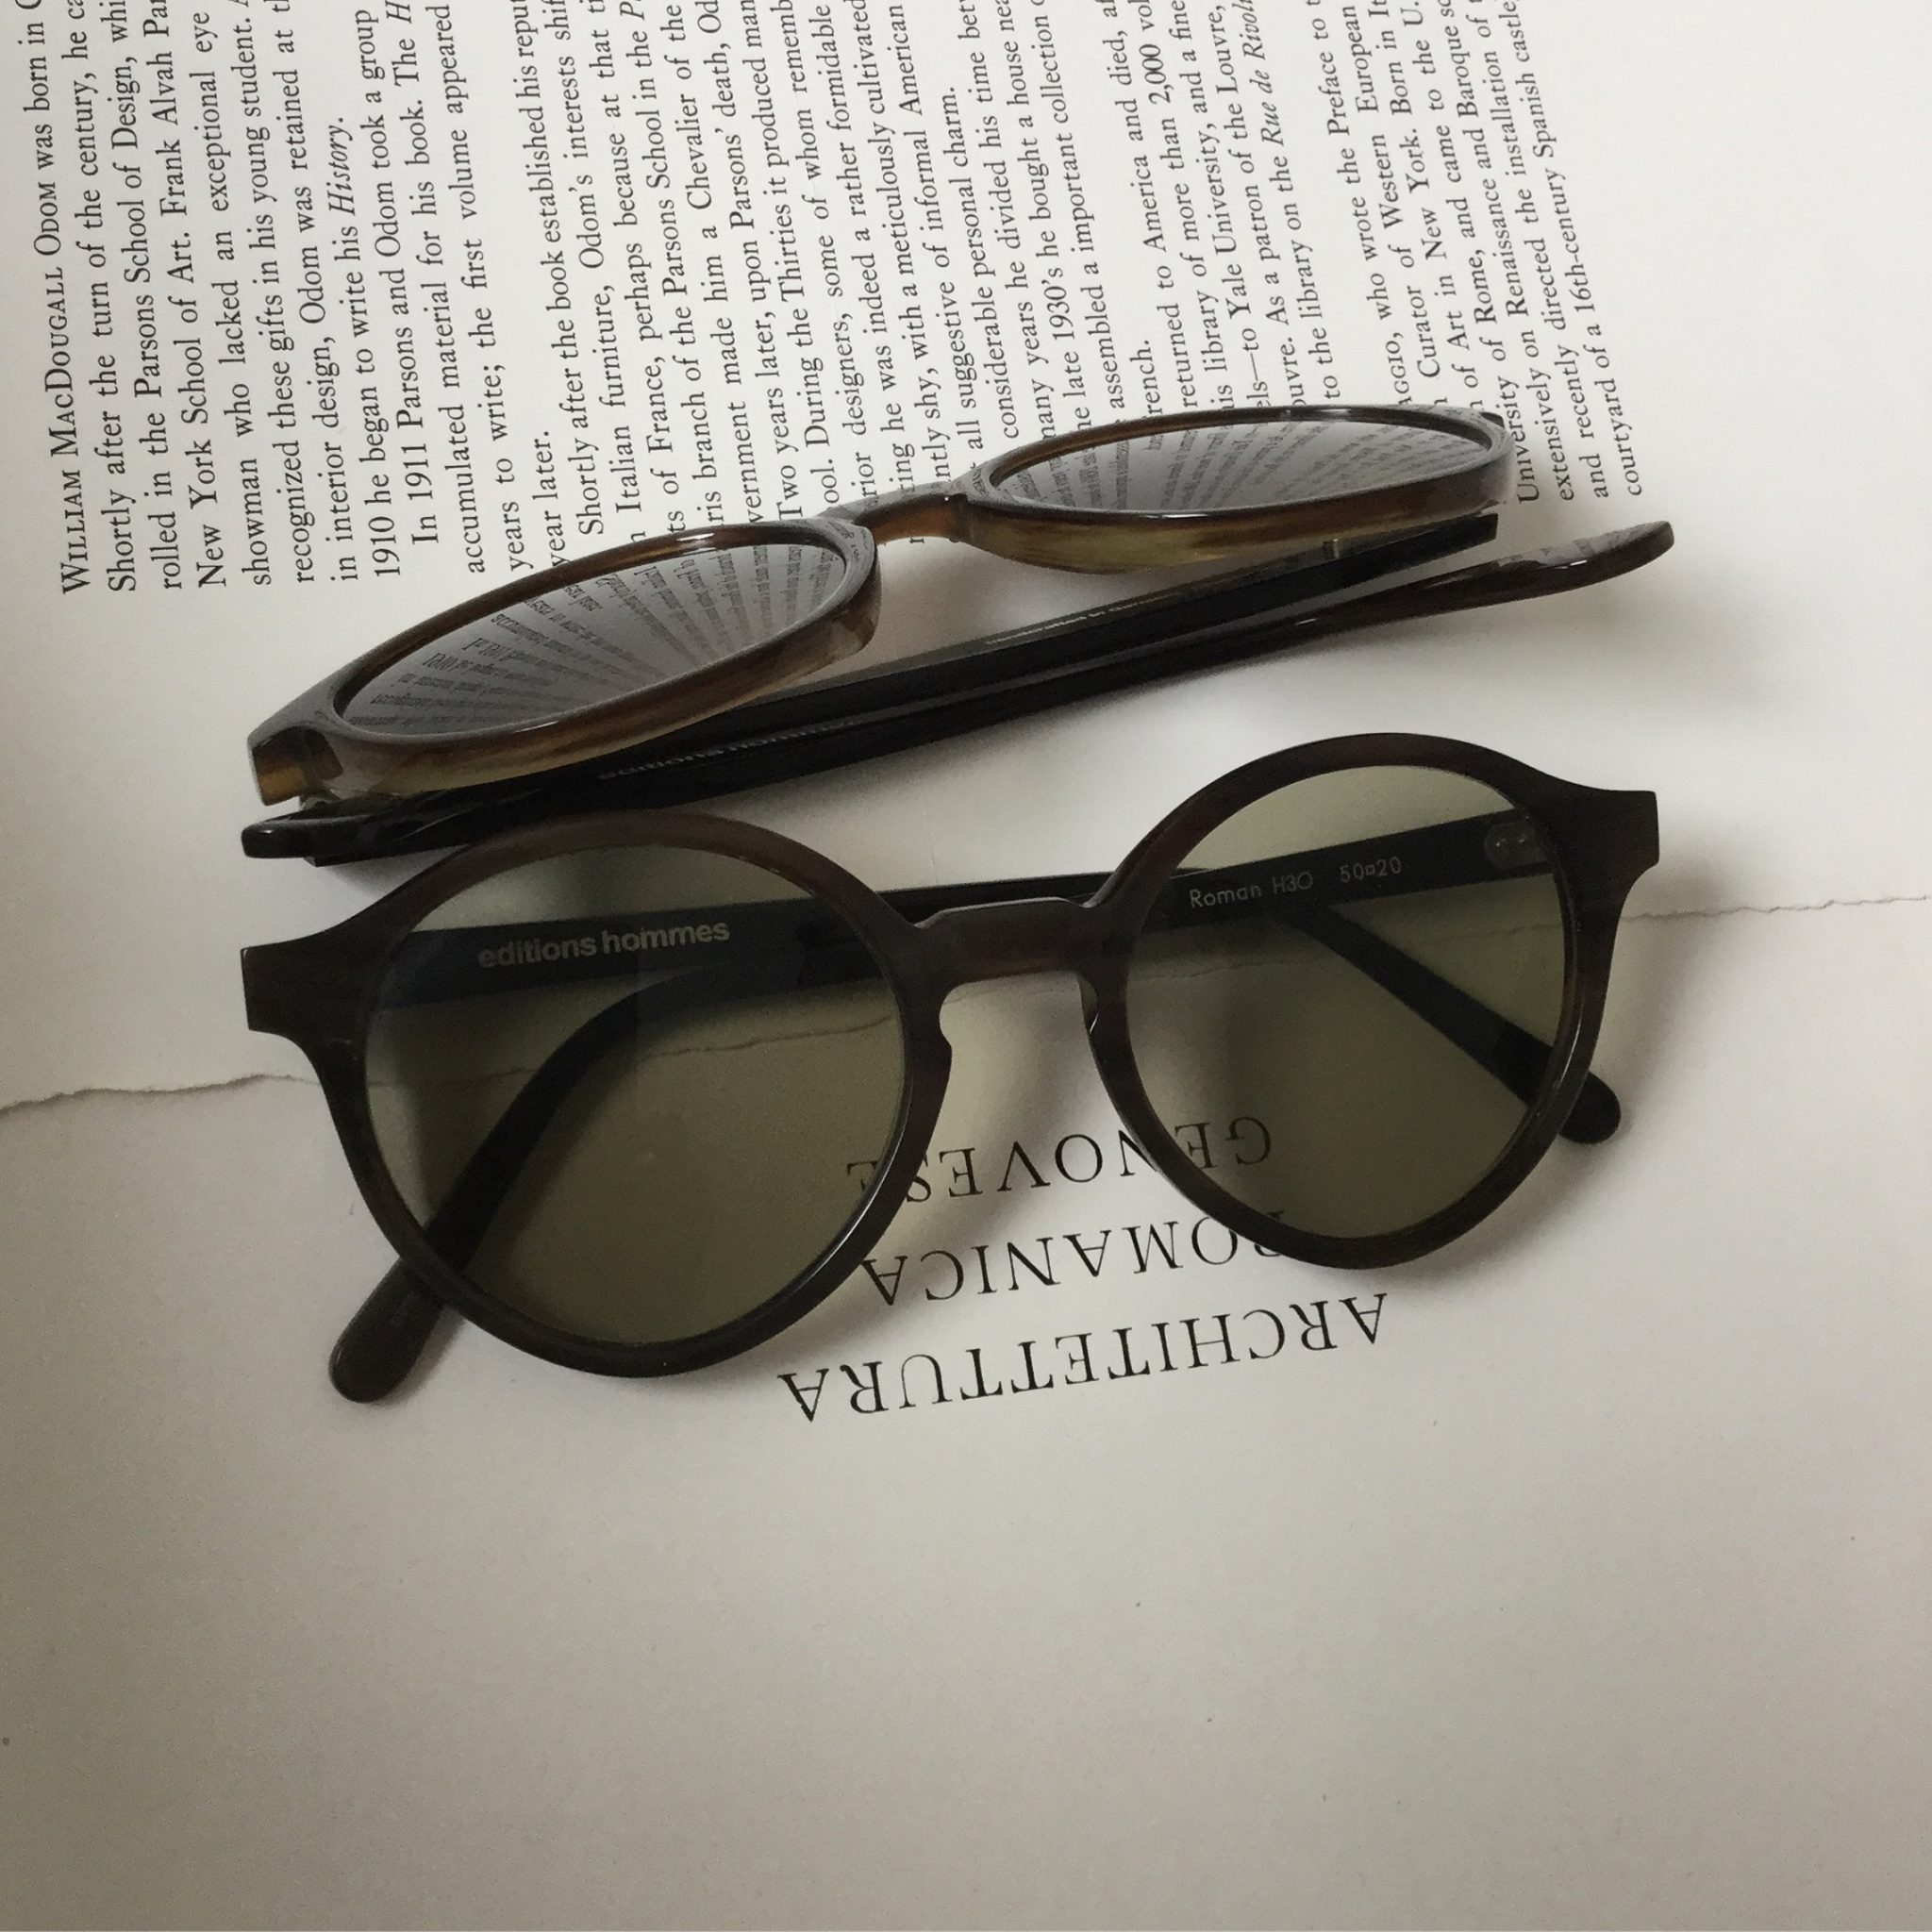 editions hommes horn spectacles 'Roman' with Barberini glass lenses